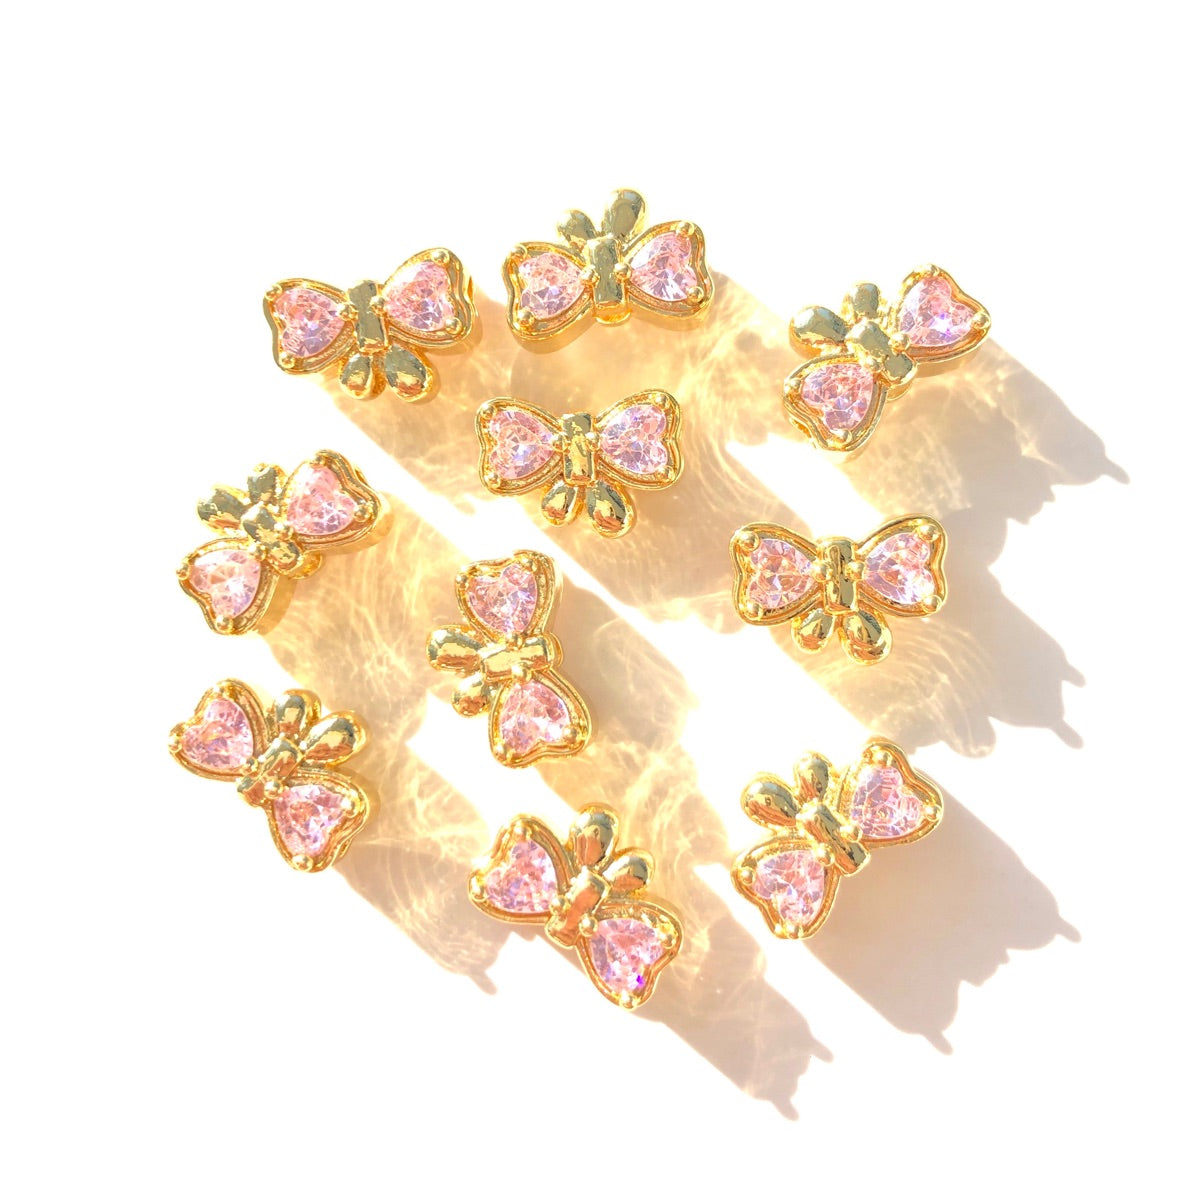 10-20-50pcs/lot Pink Heart CZ Paved Bow Tie Spacers Gold CZ Paved Spacers Big Hole Beads New Spacers Arrivals Rondelle Beads Wholesale Charms Beads Beyond